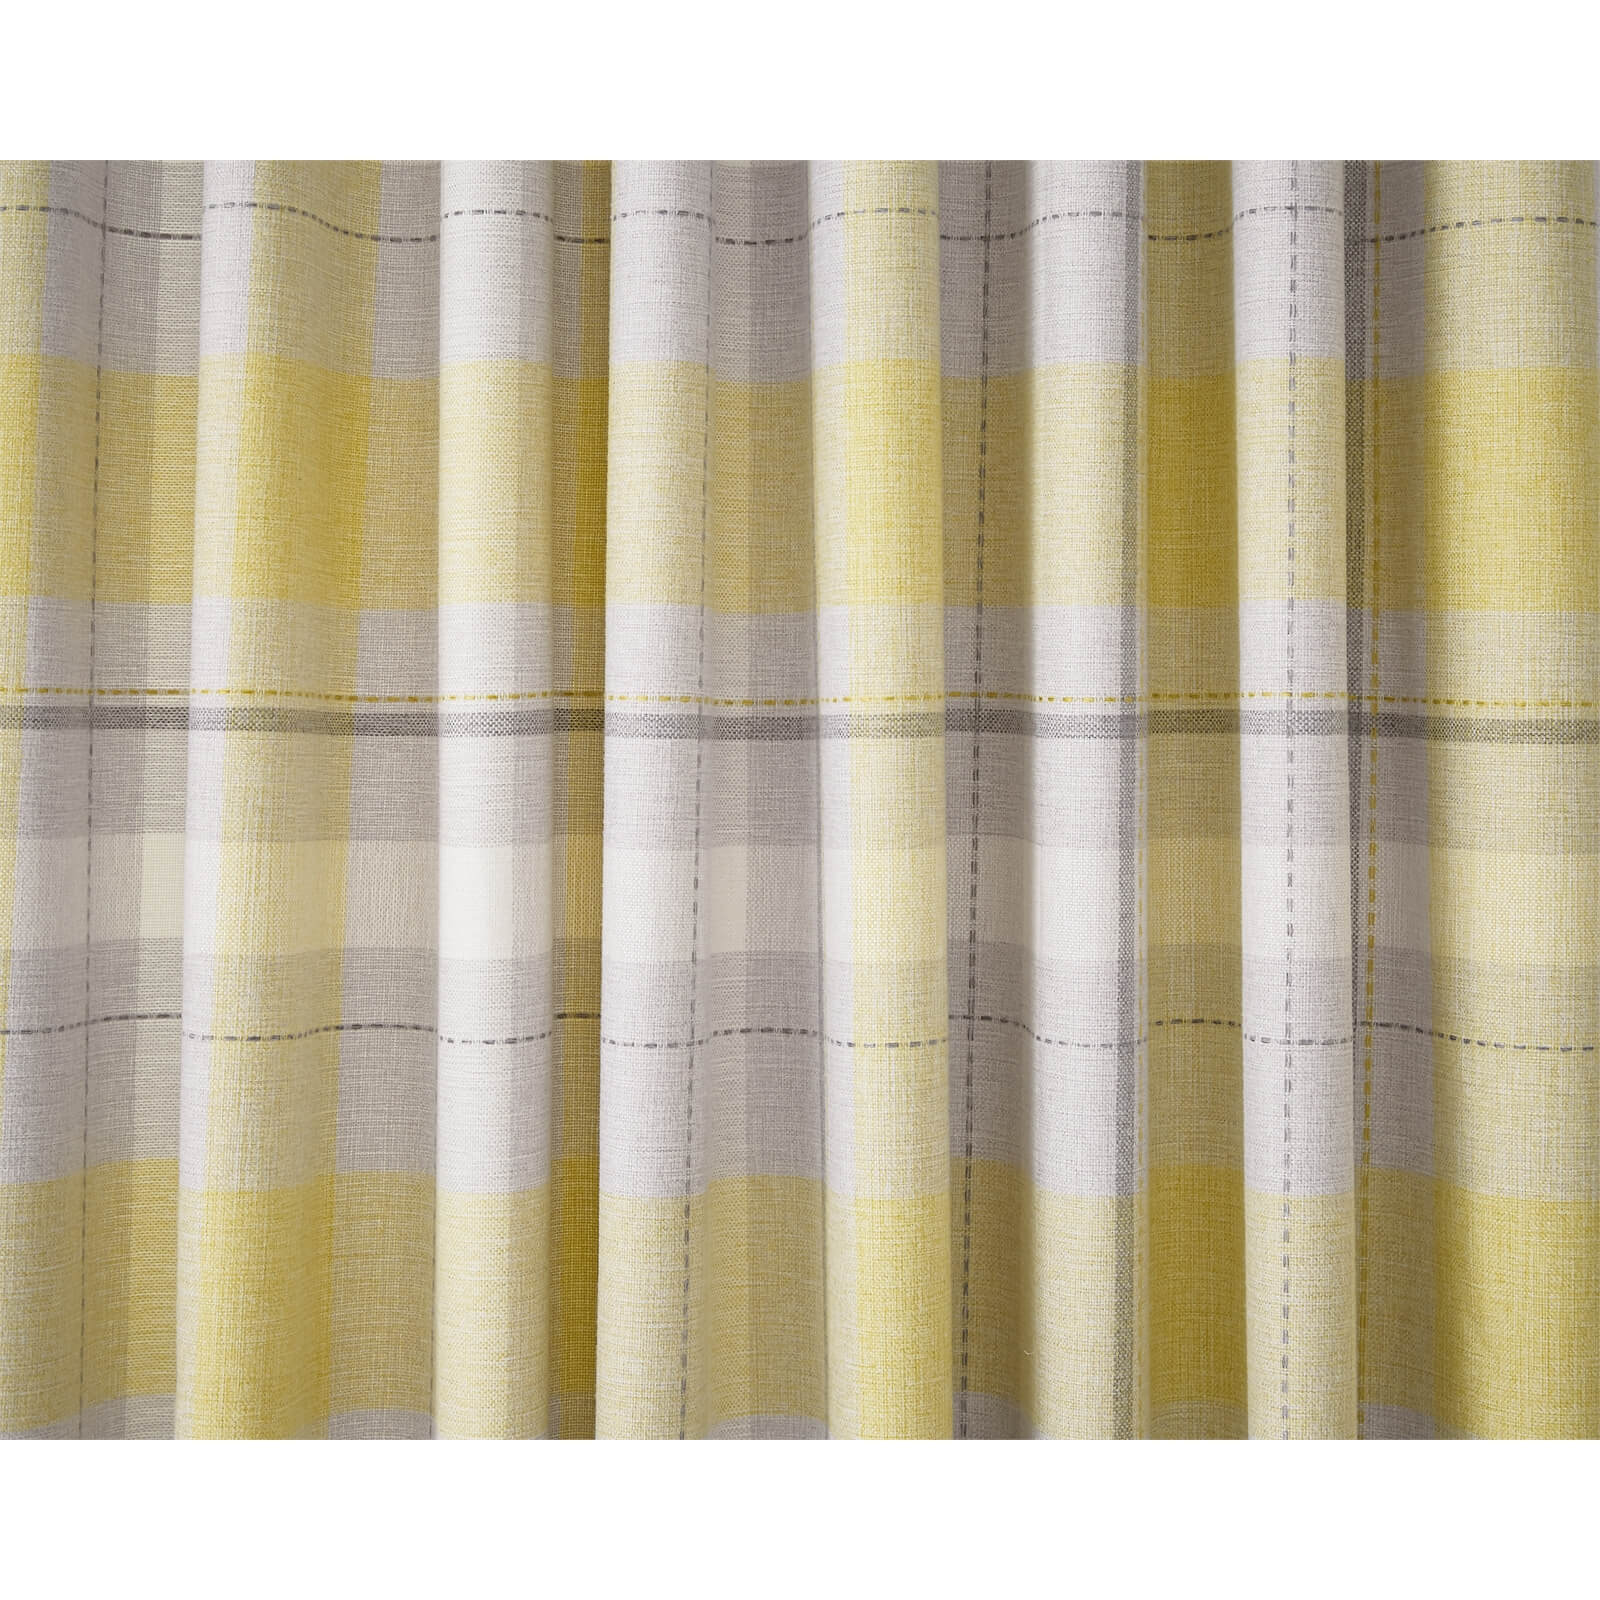 Helena Springfield Nora Lined Curtains 66 x 90 - Chartreuse